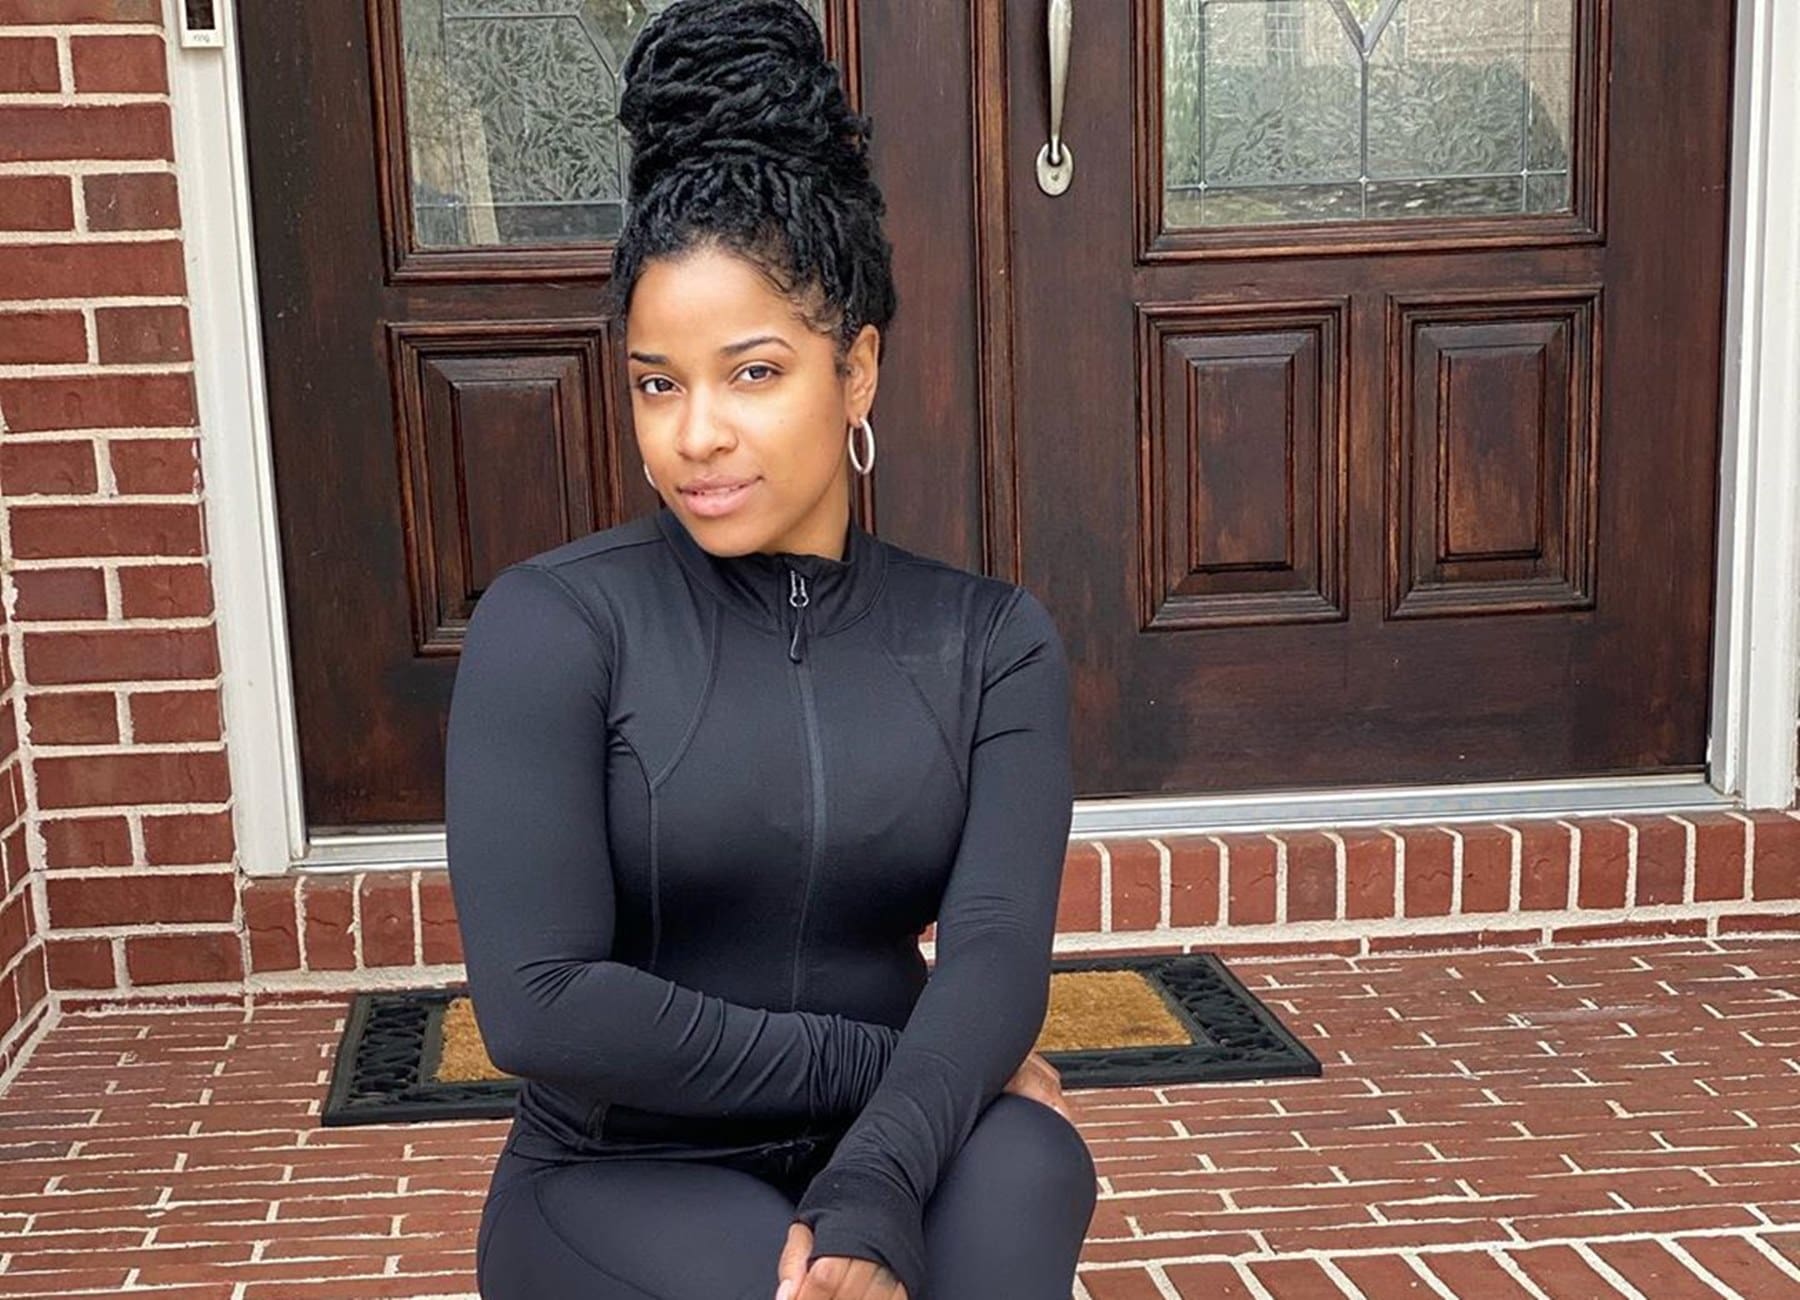 Toya Johnson Believes That If You Value Someone, You Should Tell Them